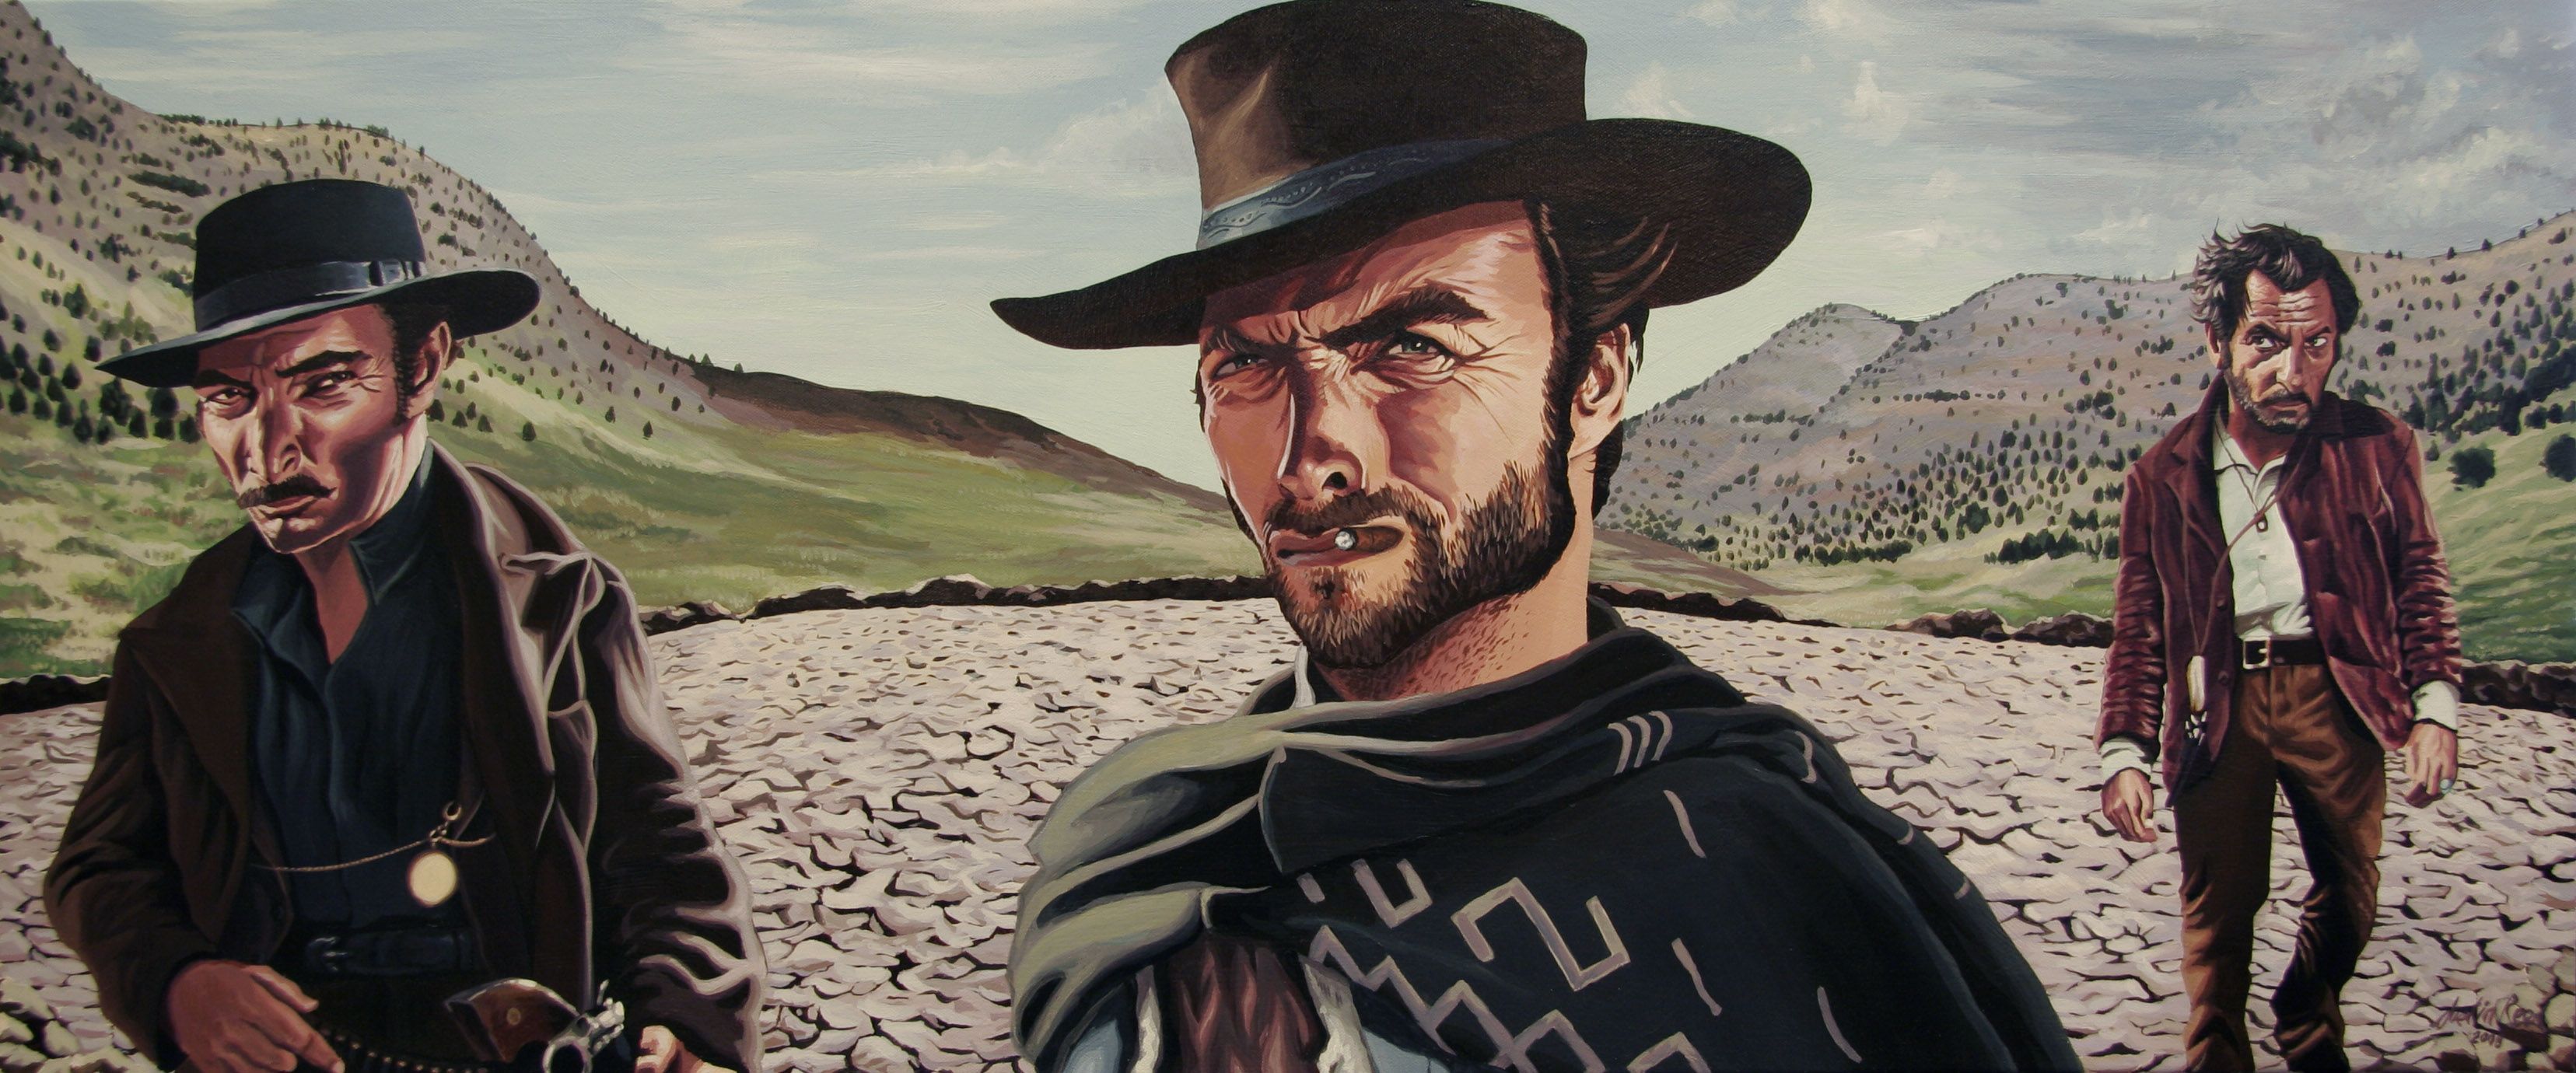 THE GOOD THE BAD AND THE UGLY western clint eastwood g wallpaper